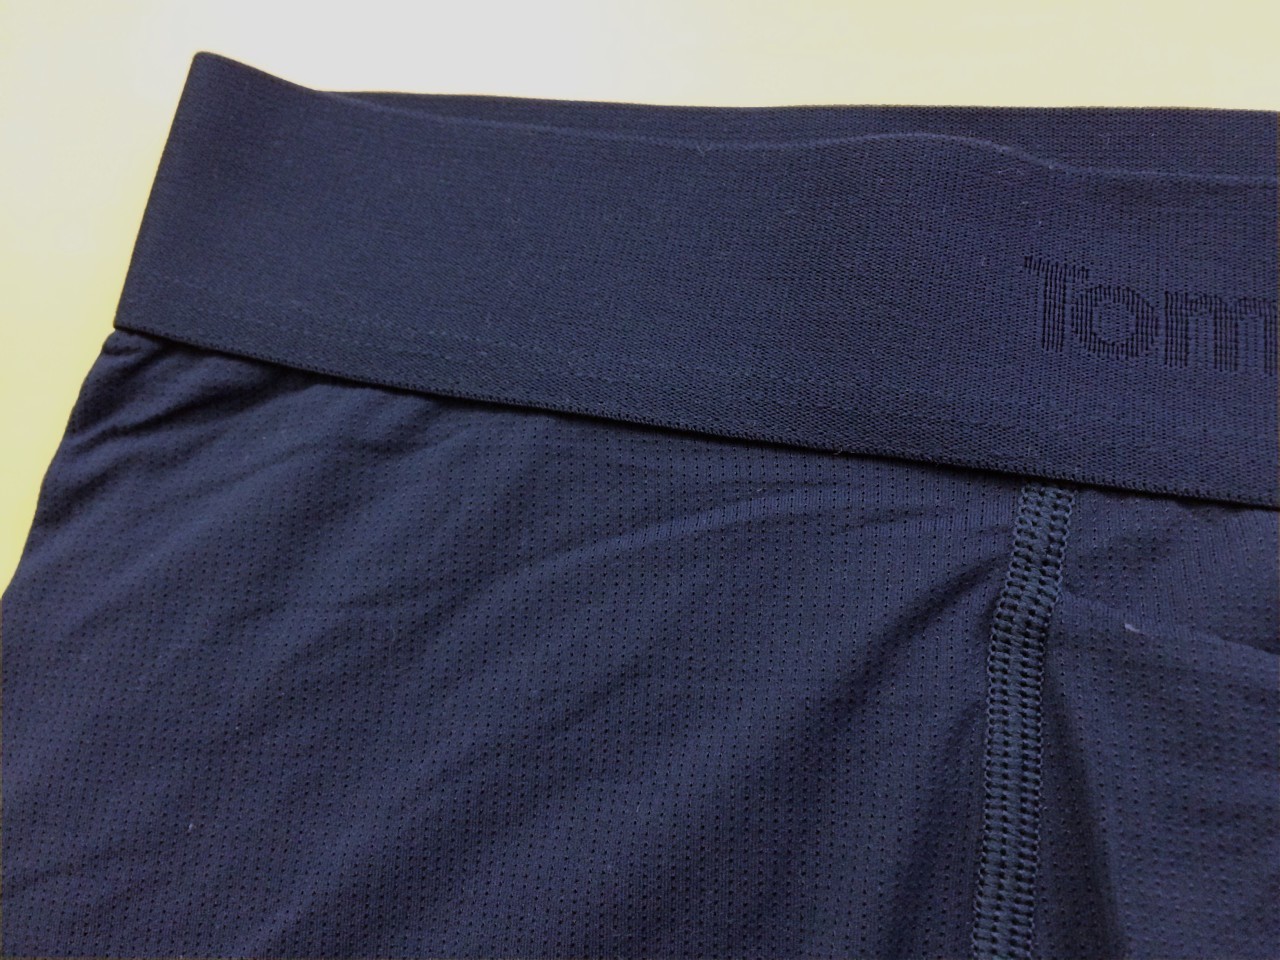 Tommy John Loungewear Review: Airy and breathable - Reviewed